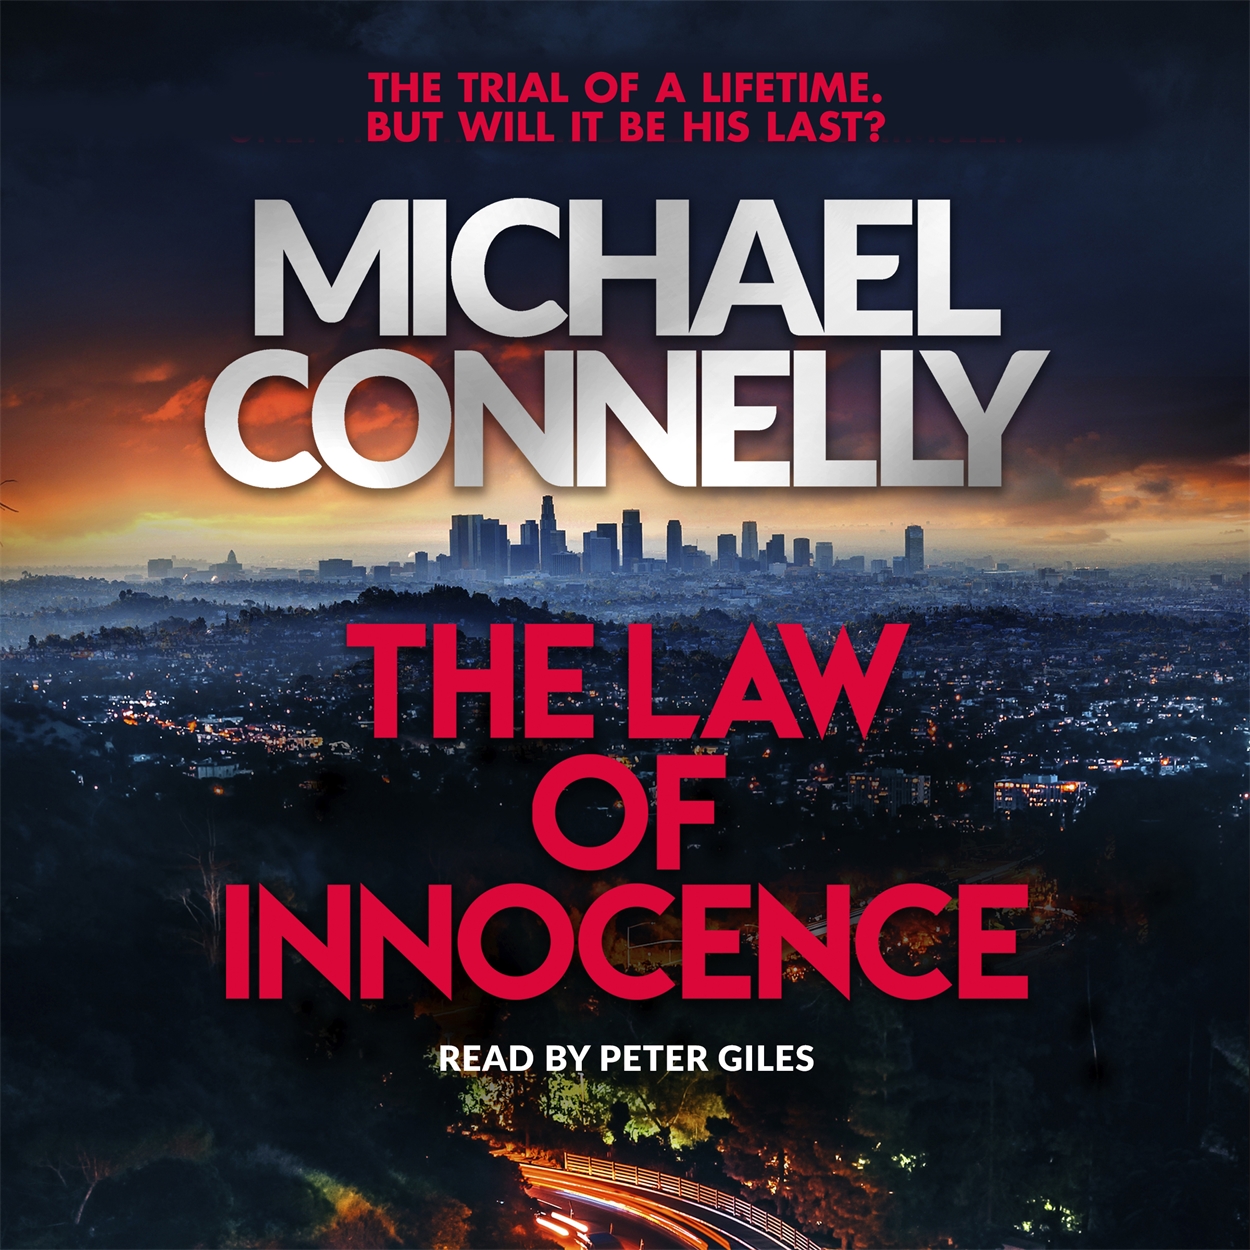 the law of innocence by michael connelly